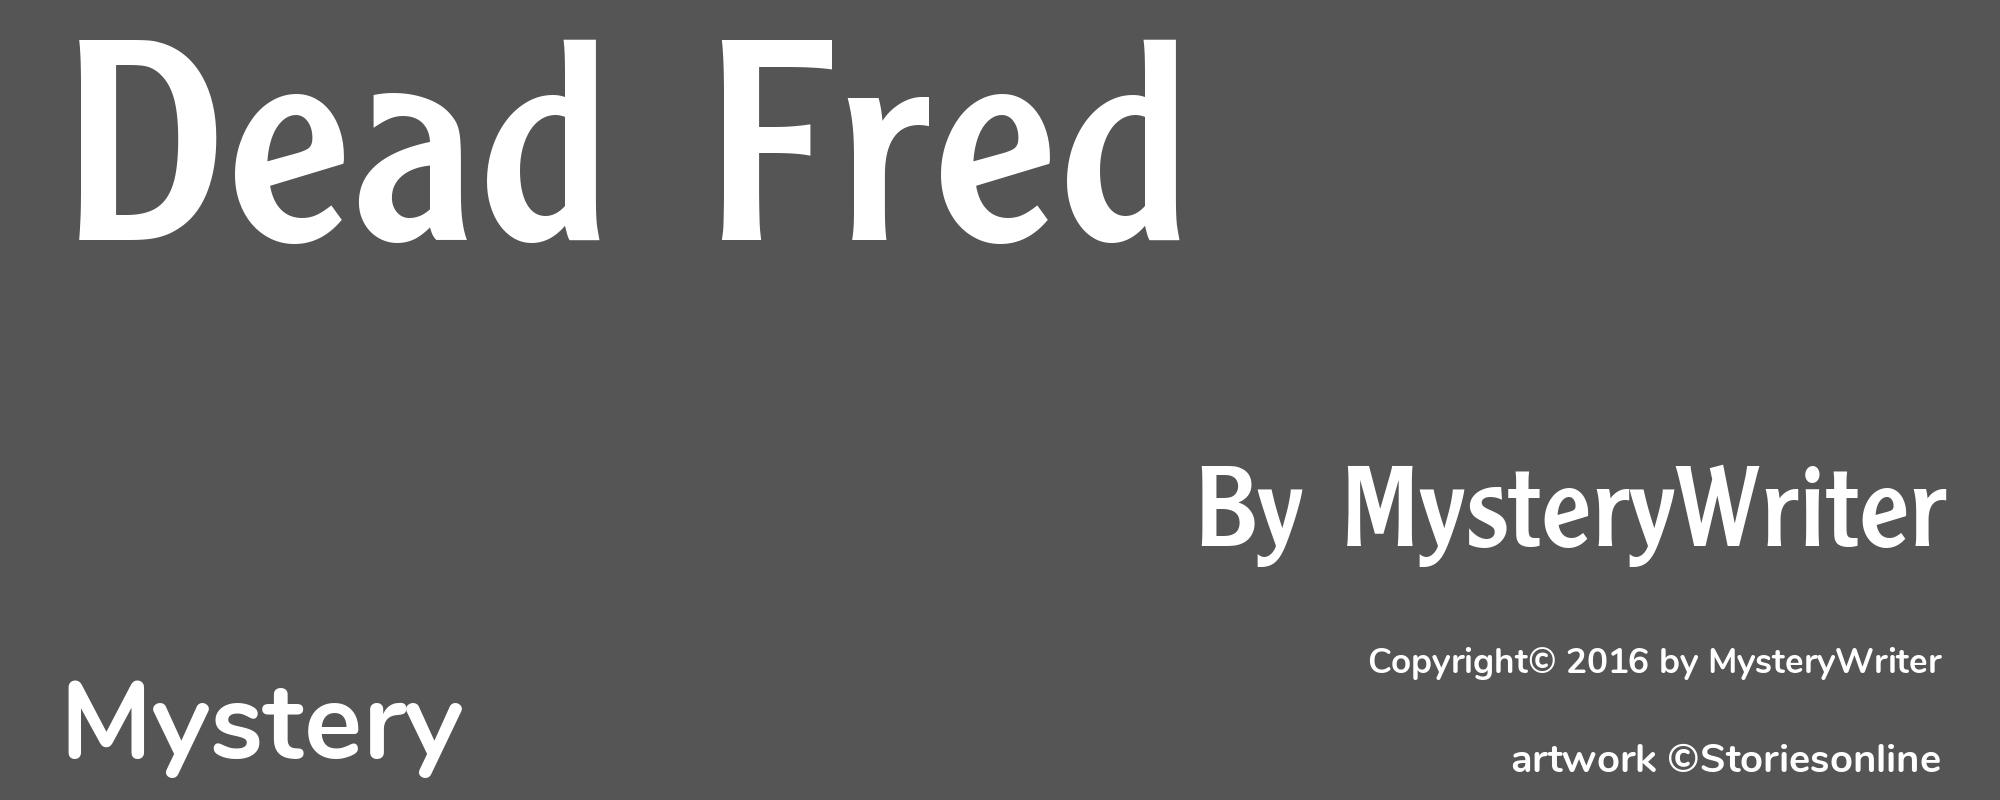 Dead Fred - Cover